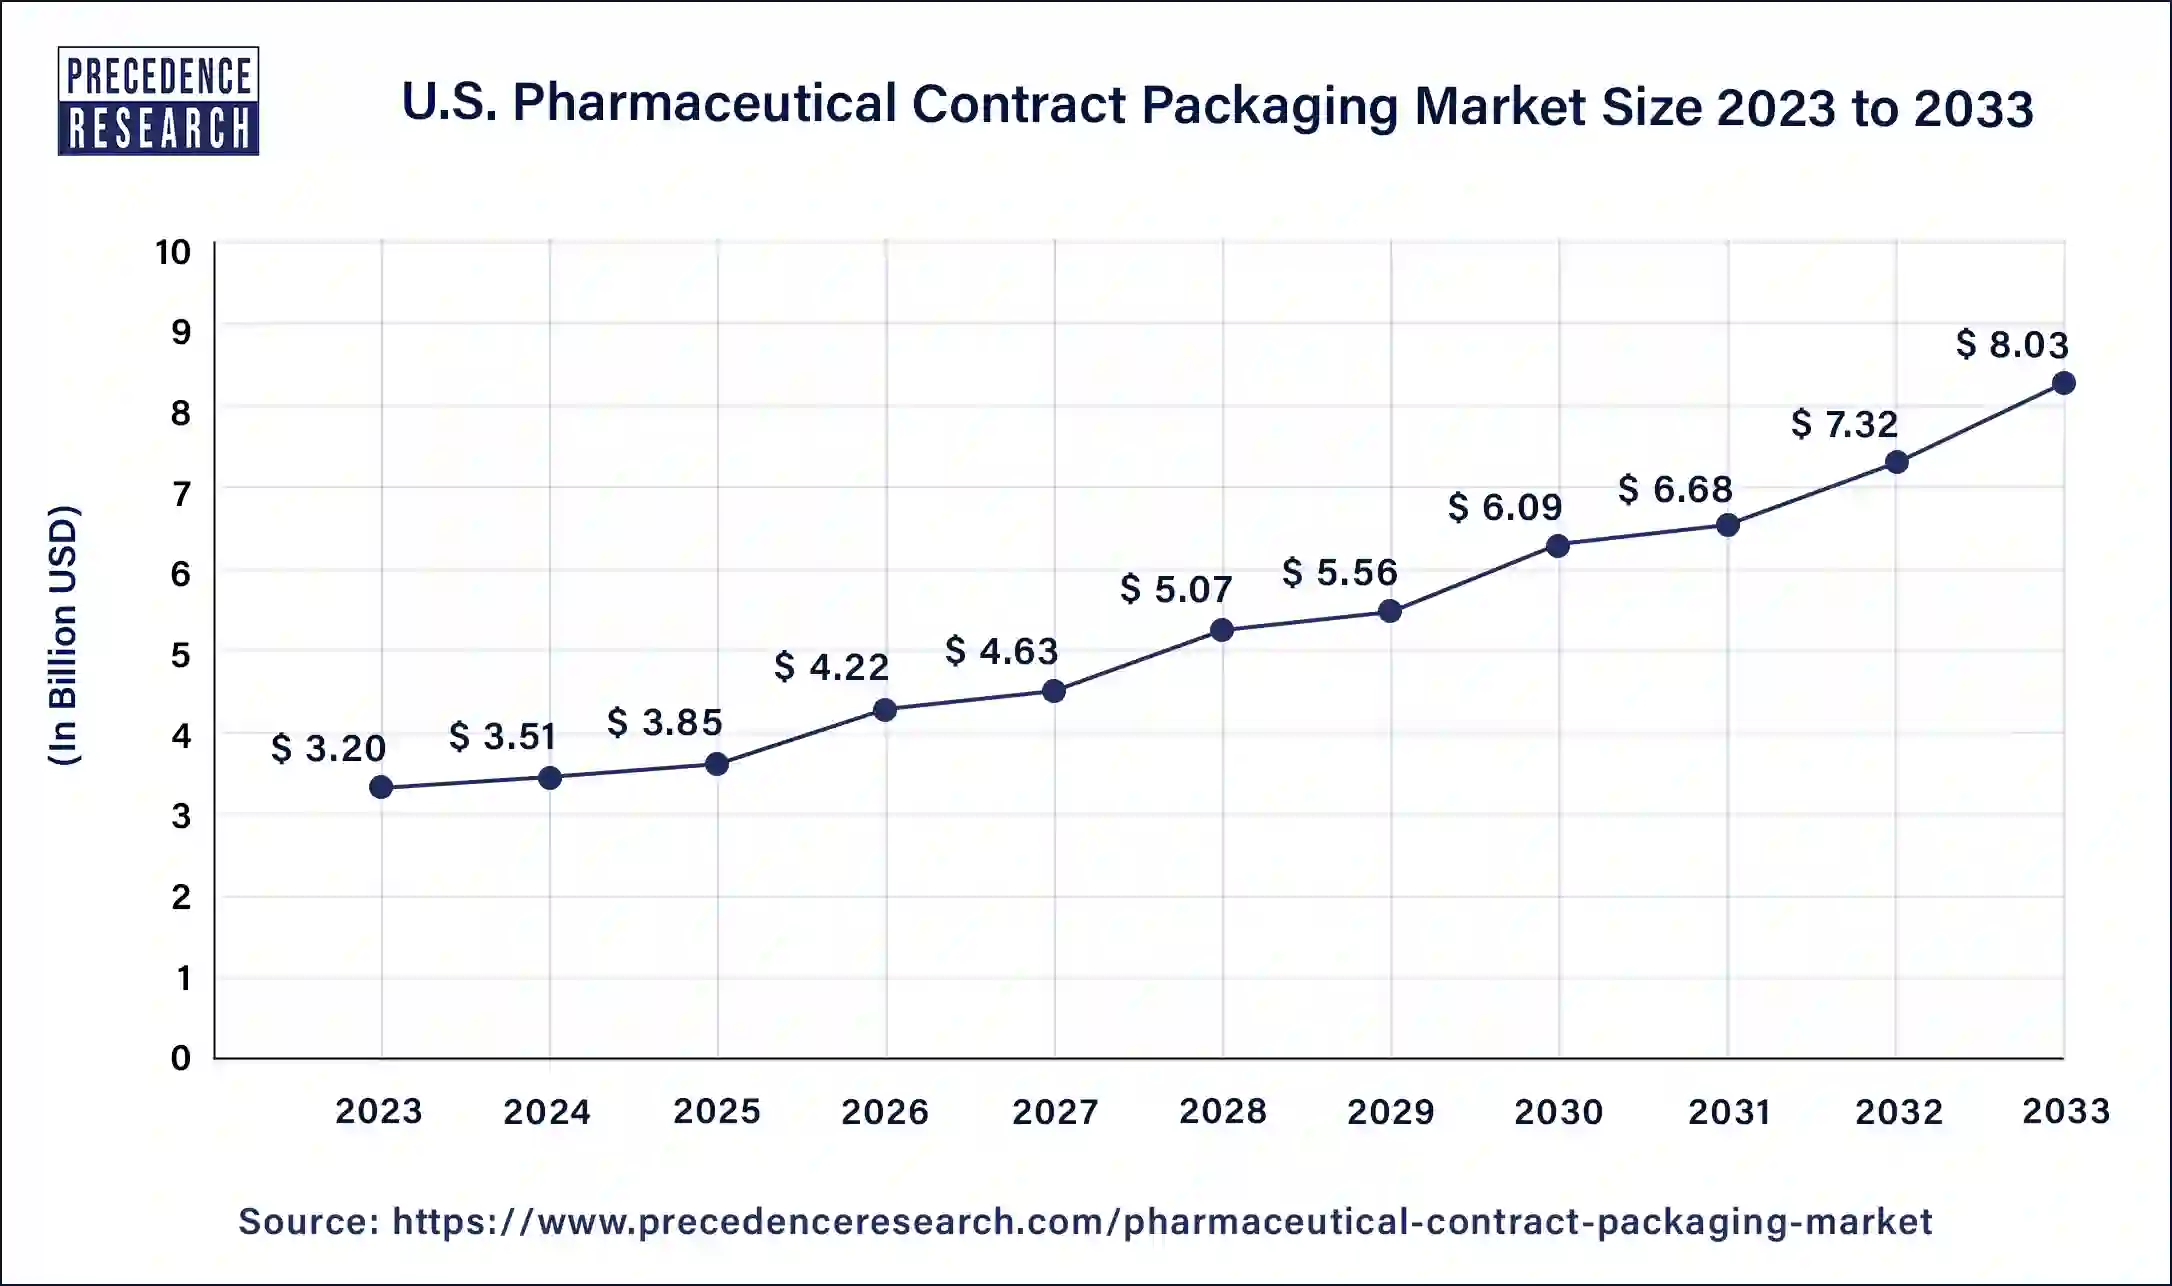 U.S. Pharmaceutical Contract Packaging Market Size 2024 to 2033